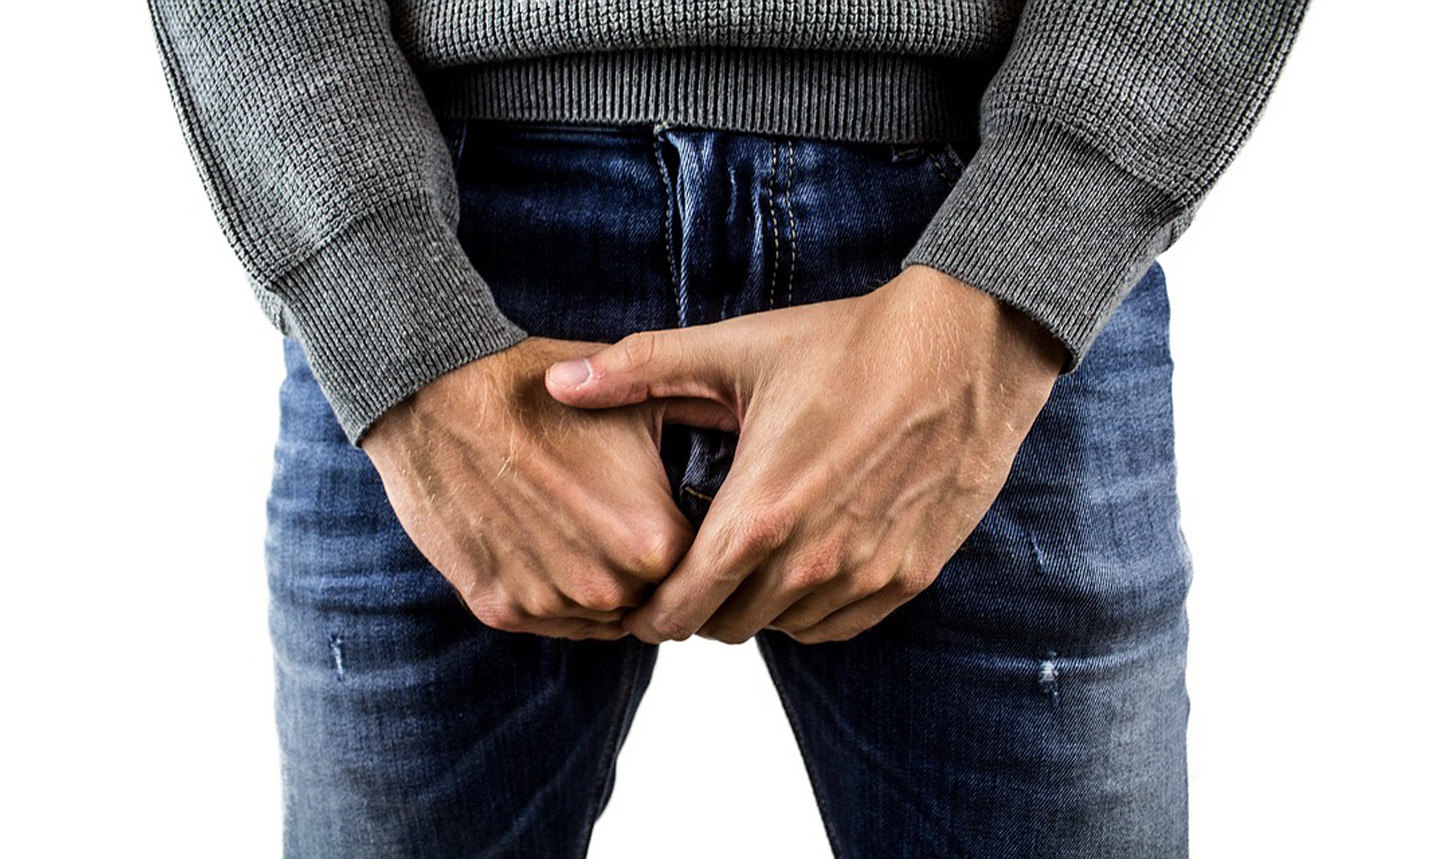 Erectile Dysfunction: Causes, Diagnosis, and Treatment | HealthSoul